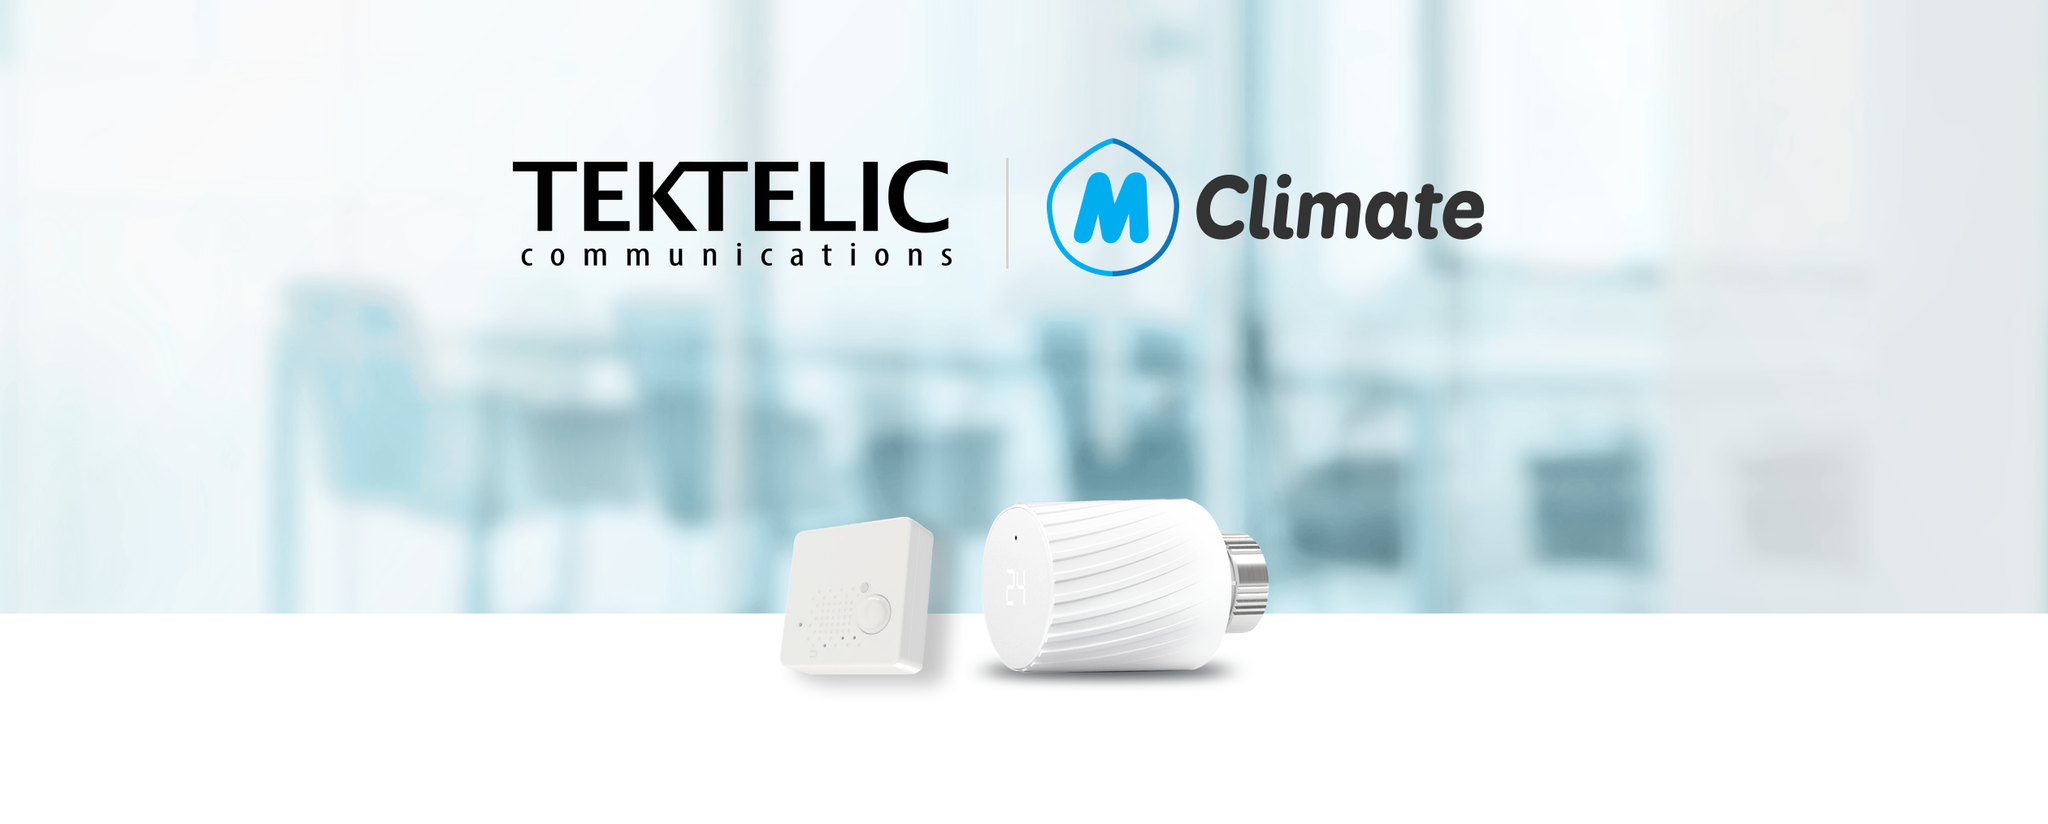 TEKTELIC and MClimate come together with an innovative Smart Building Solution